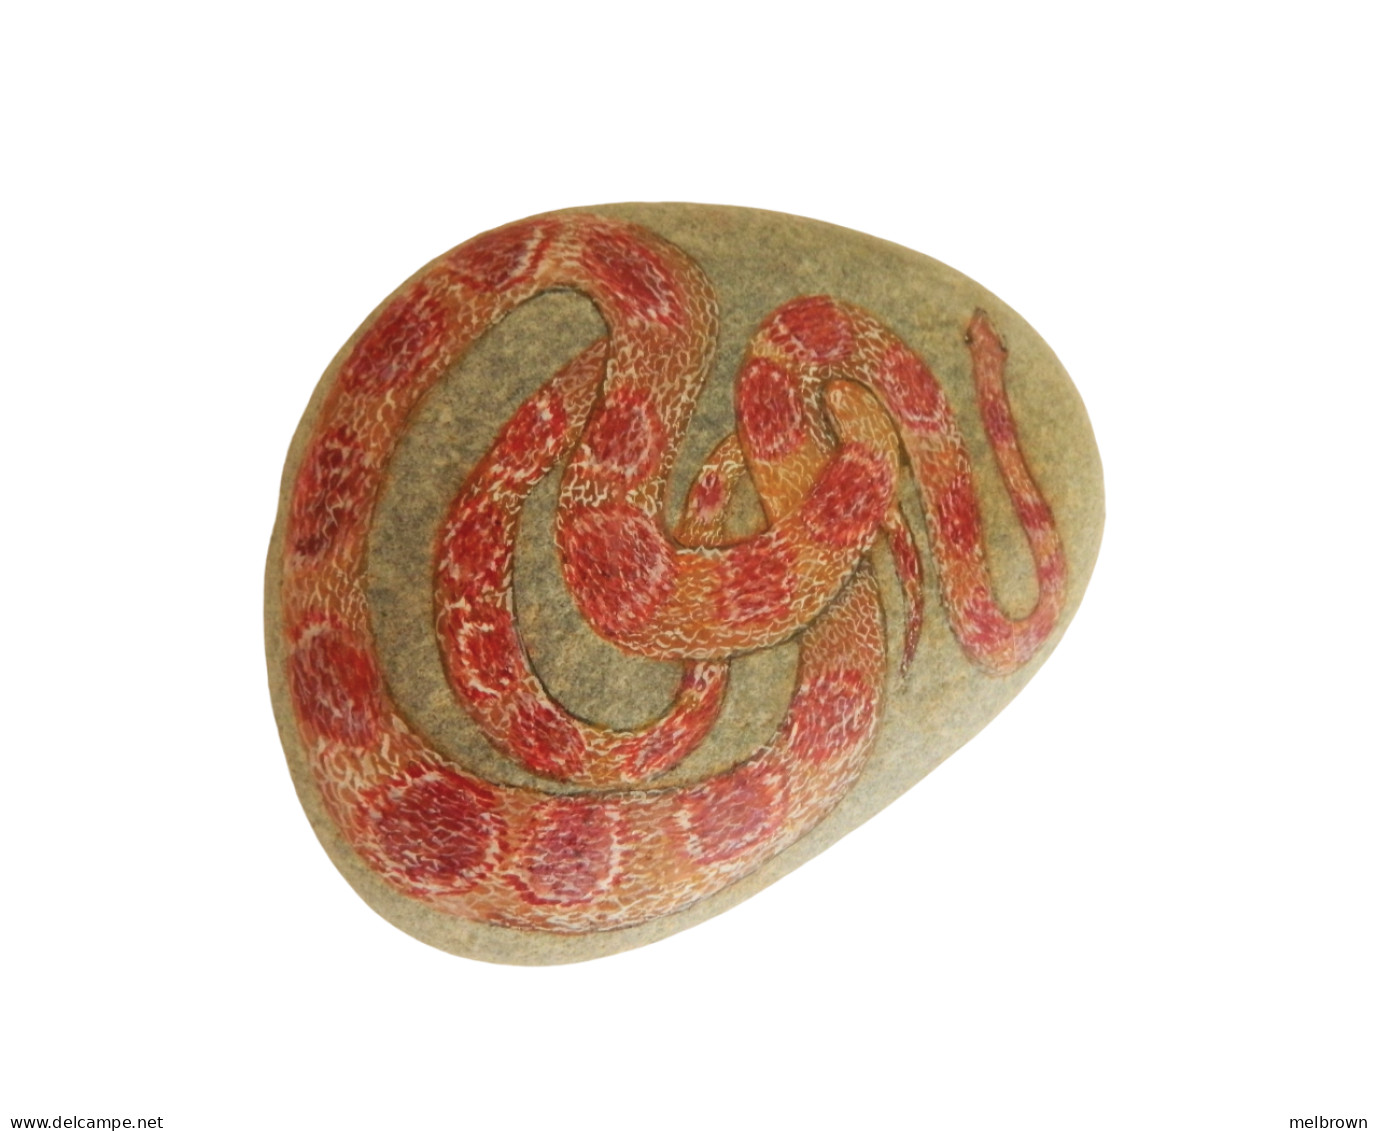 CORN SNAKE Hand Painted On A Beach Stone Paperweight Decoration - Presse-papier